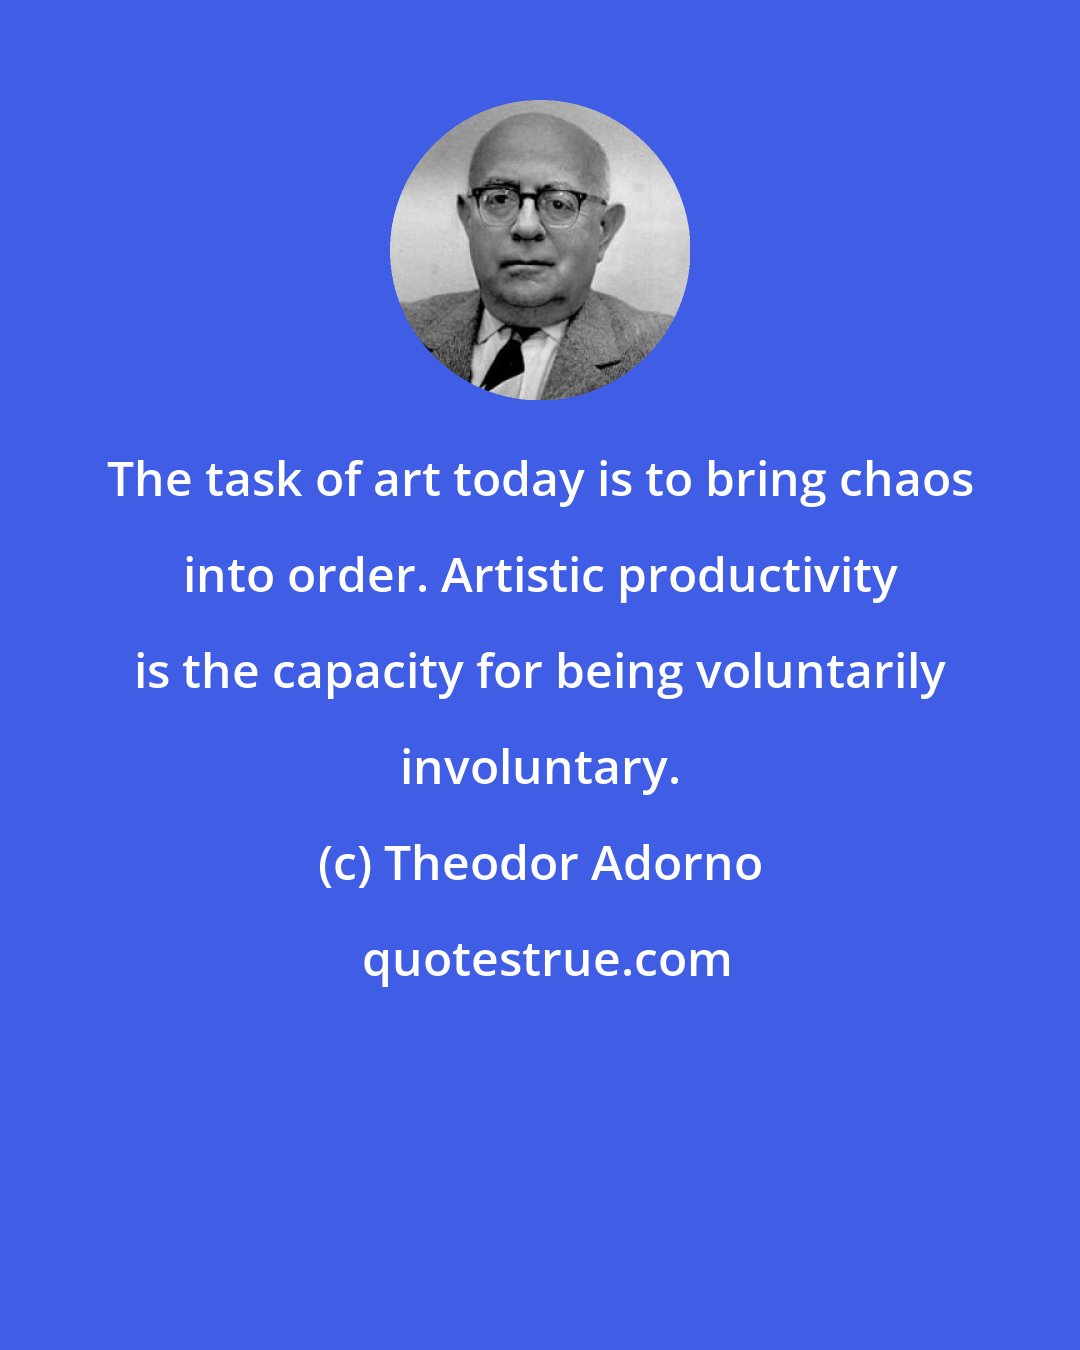 Theodor Adorno: The task of art today is to bring chaos into order. Artistic productivity is the capacity for being voluntarily involuntary.